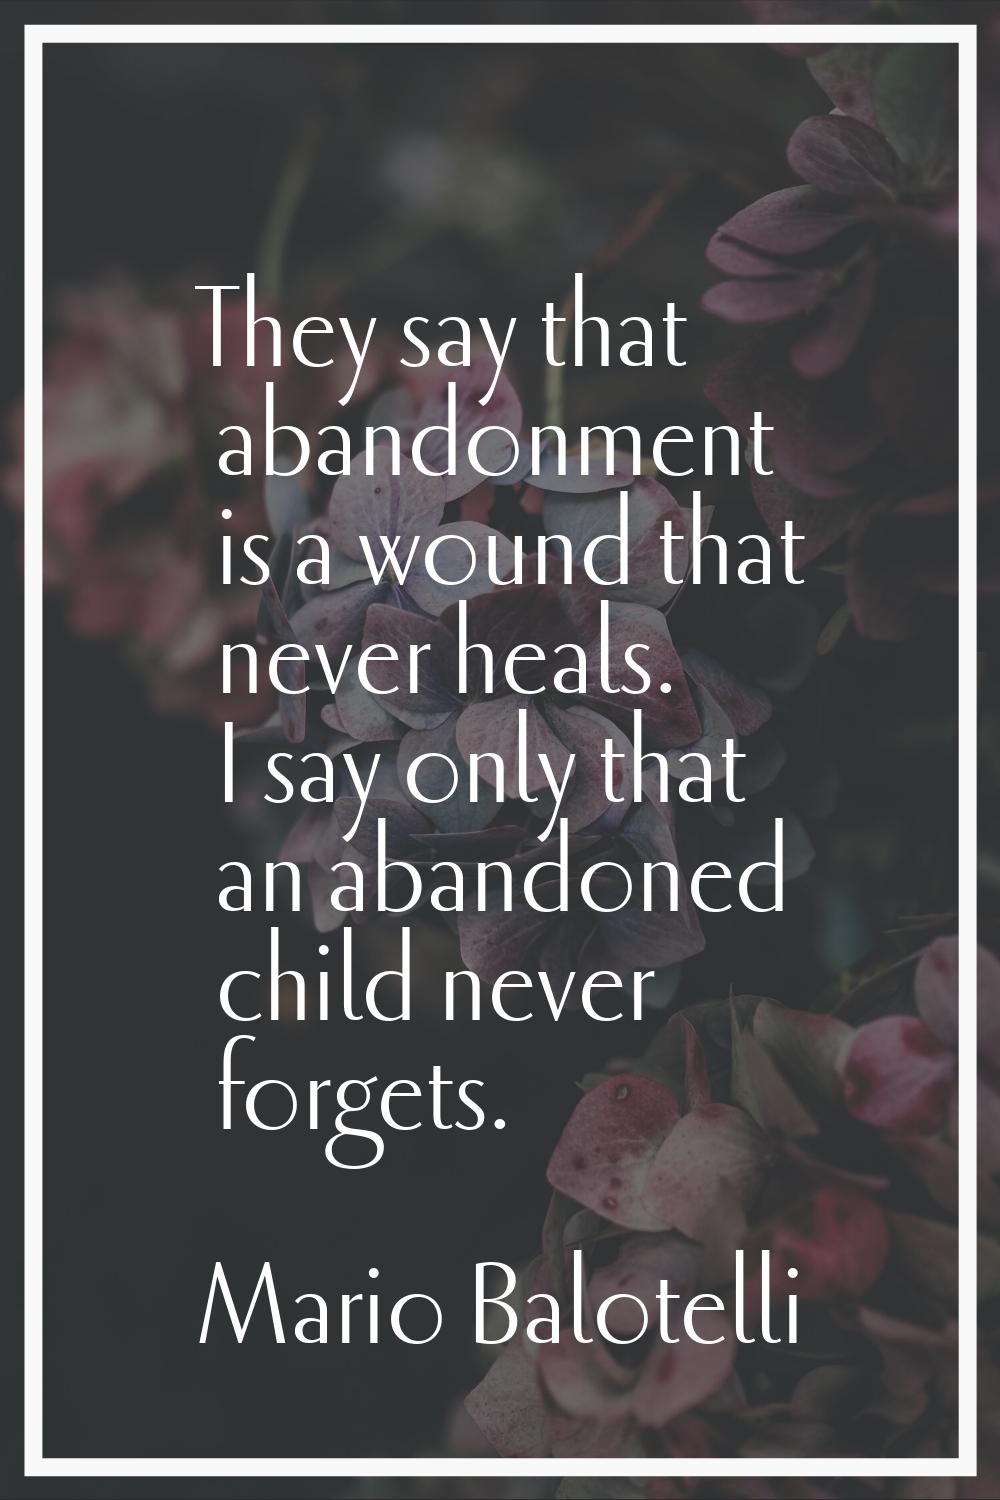 They say that abandonment is a wound that never heals. I say only that an abandoned child never for